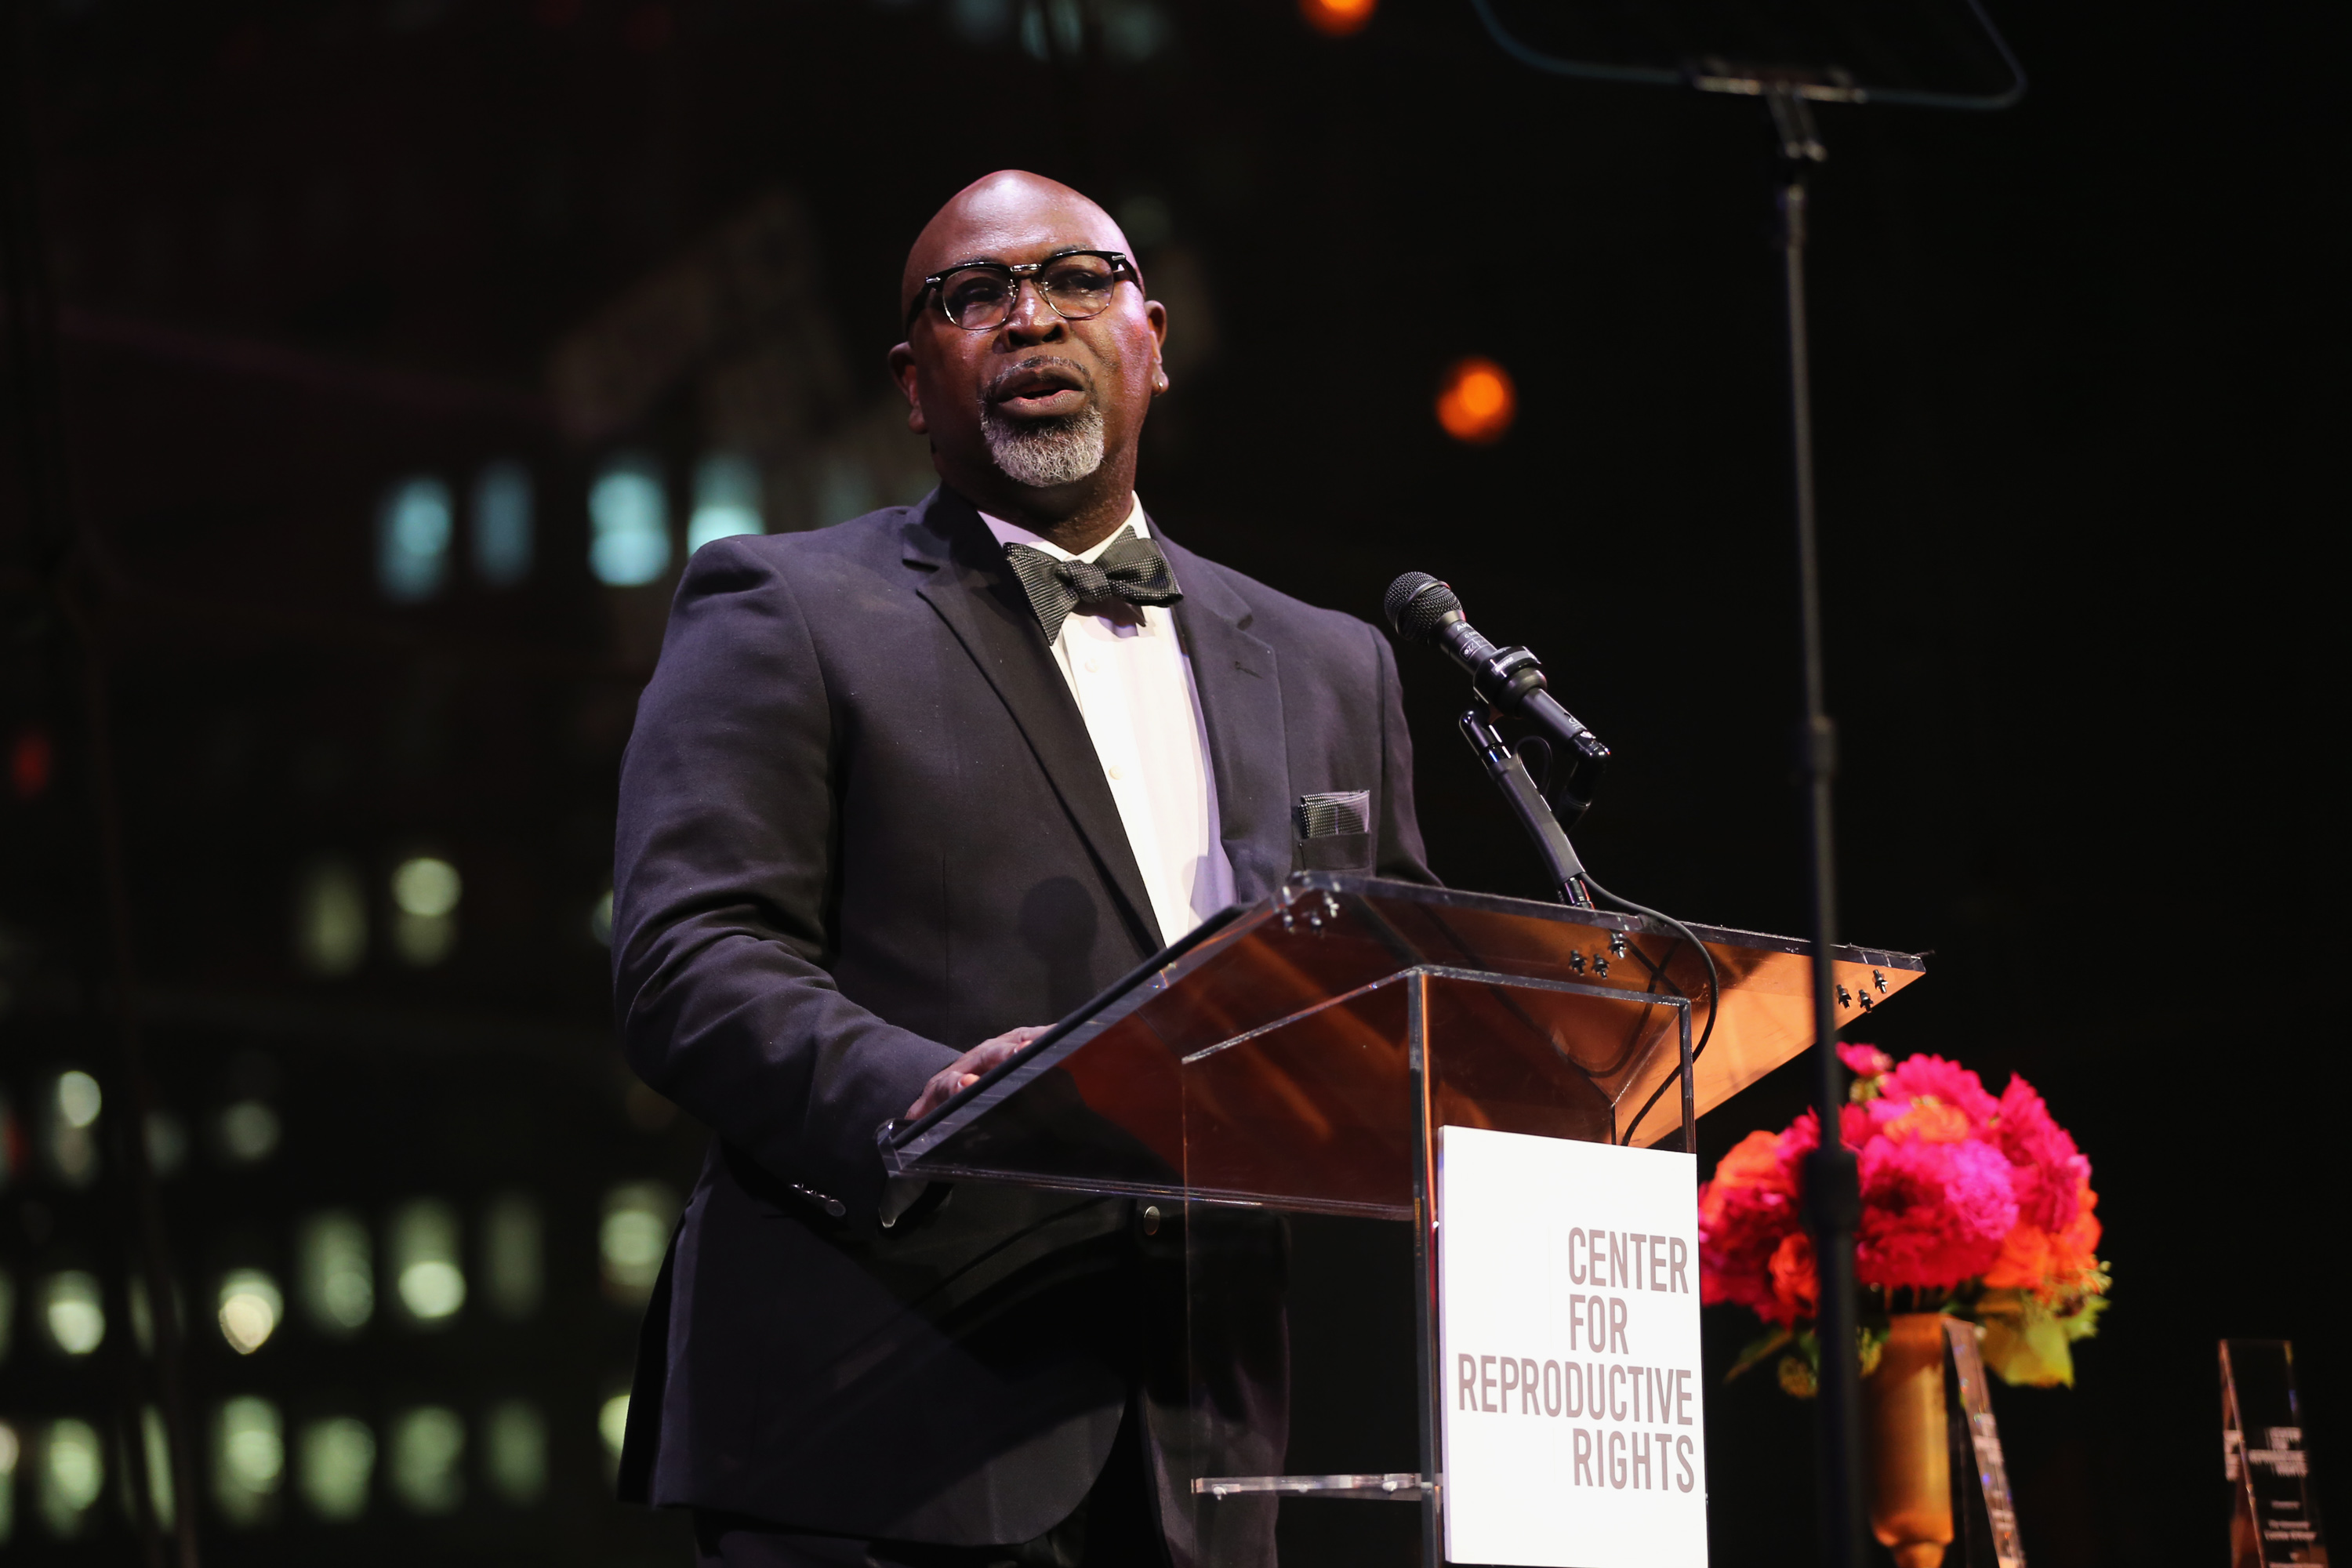 Dr. Willie Parker is Putting Himself on the Line to Provide Abortions in the Deep South